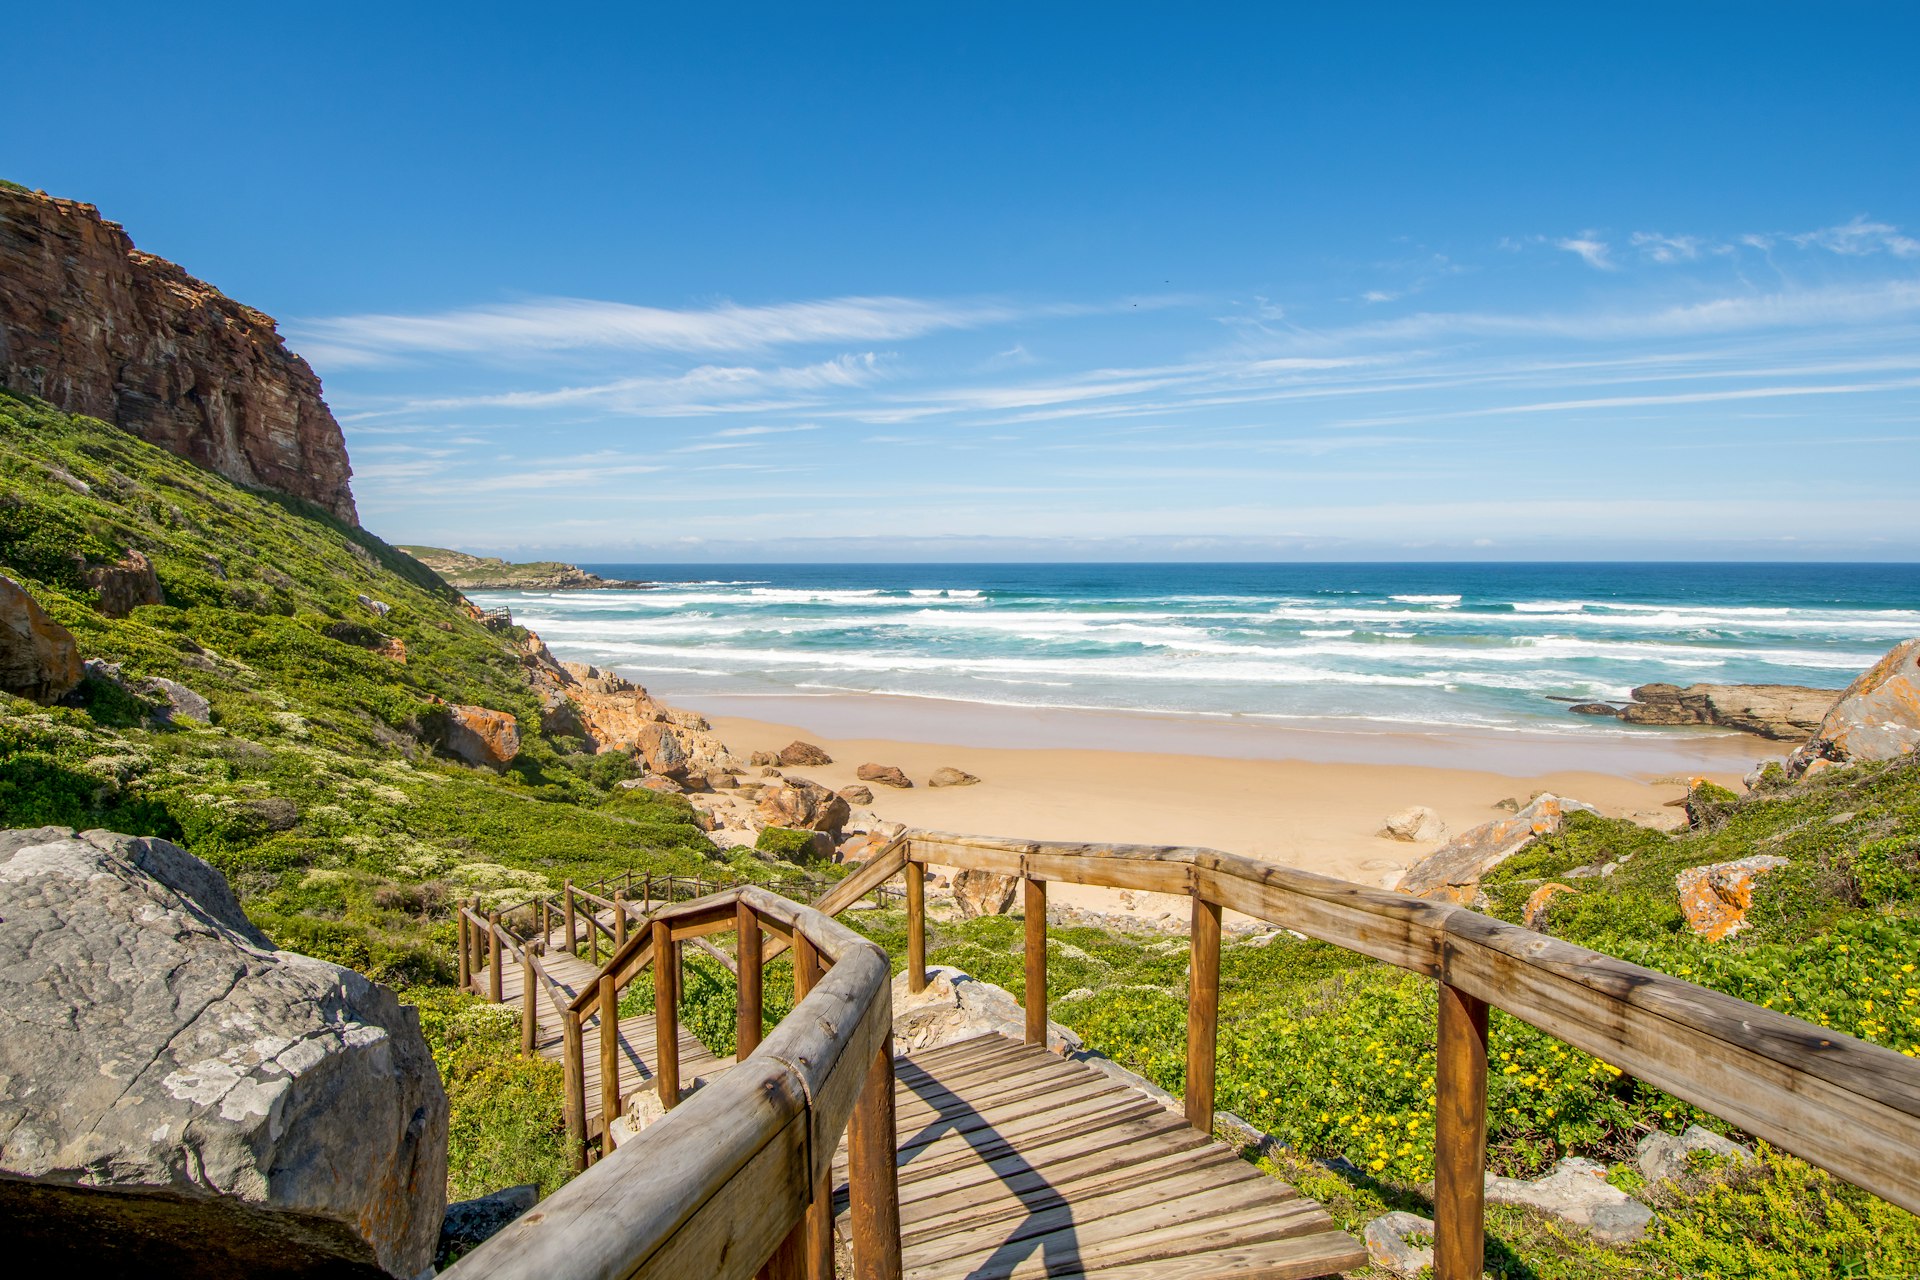 Robberg Beach on the Garden Route in South Africa